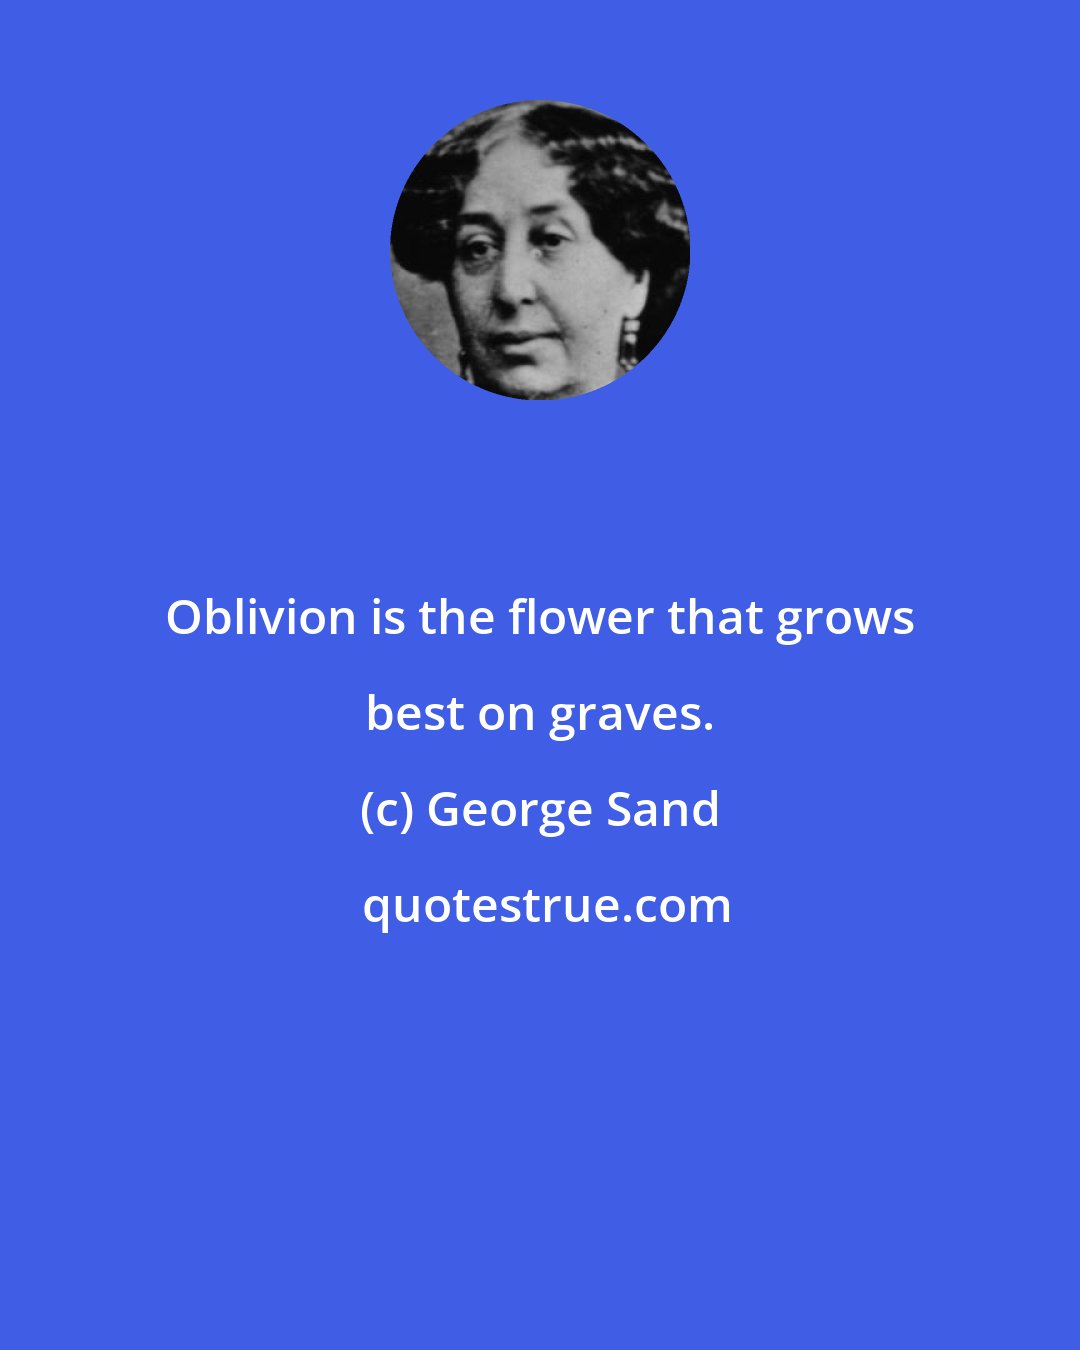 George Sand: Oblivion is the flower that grows best on graves.